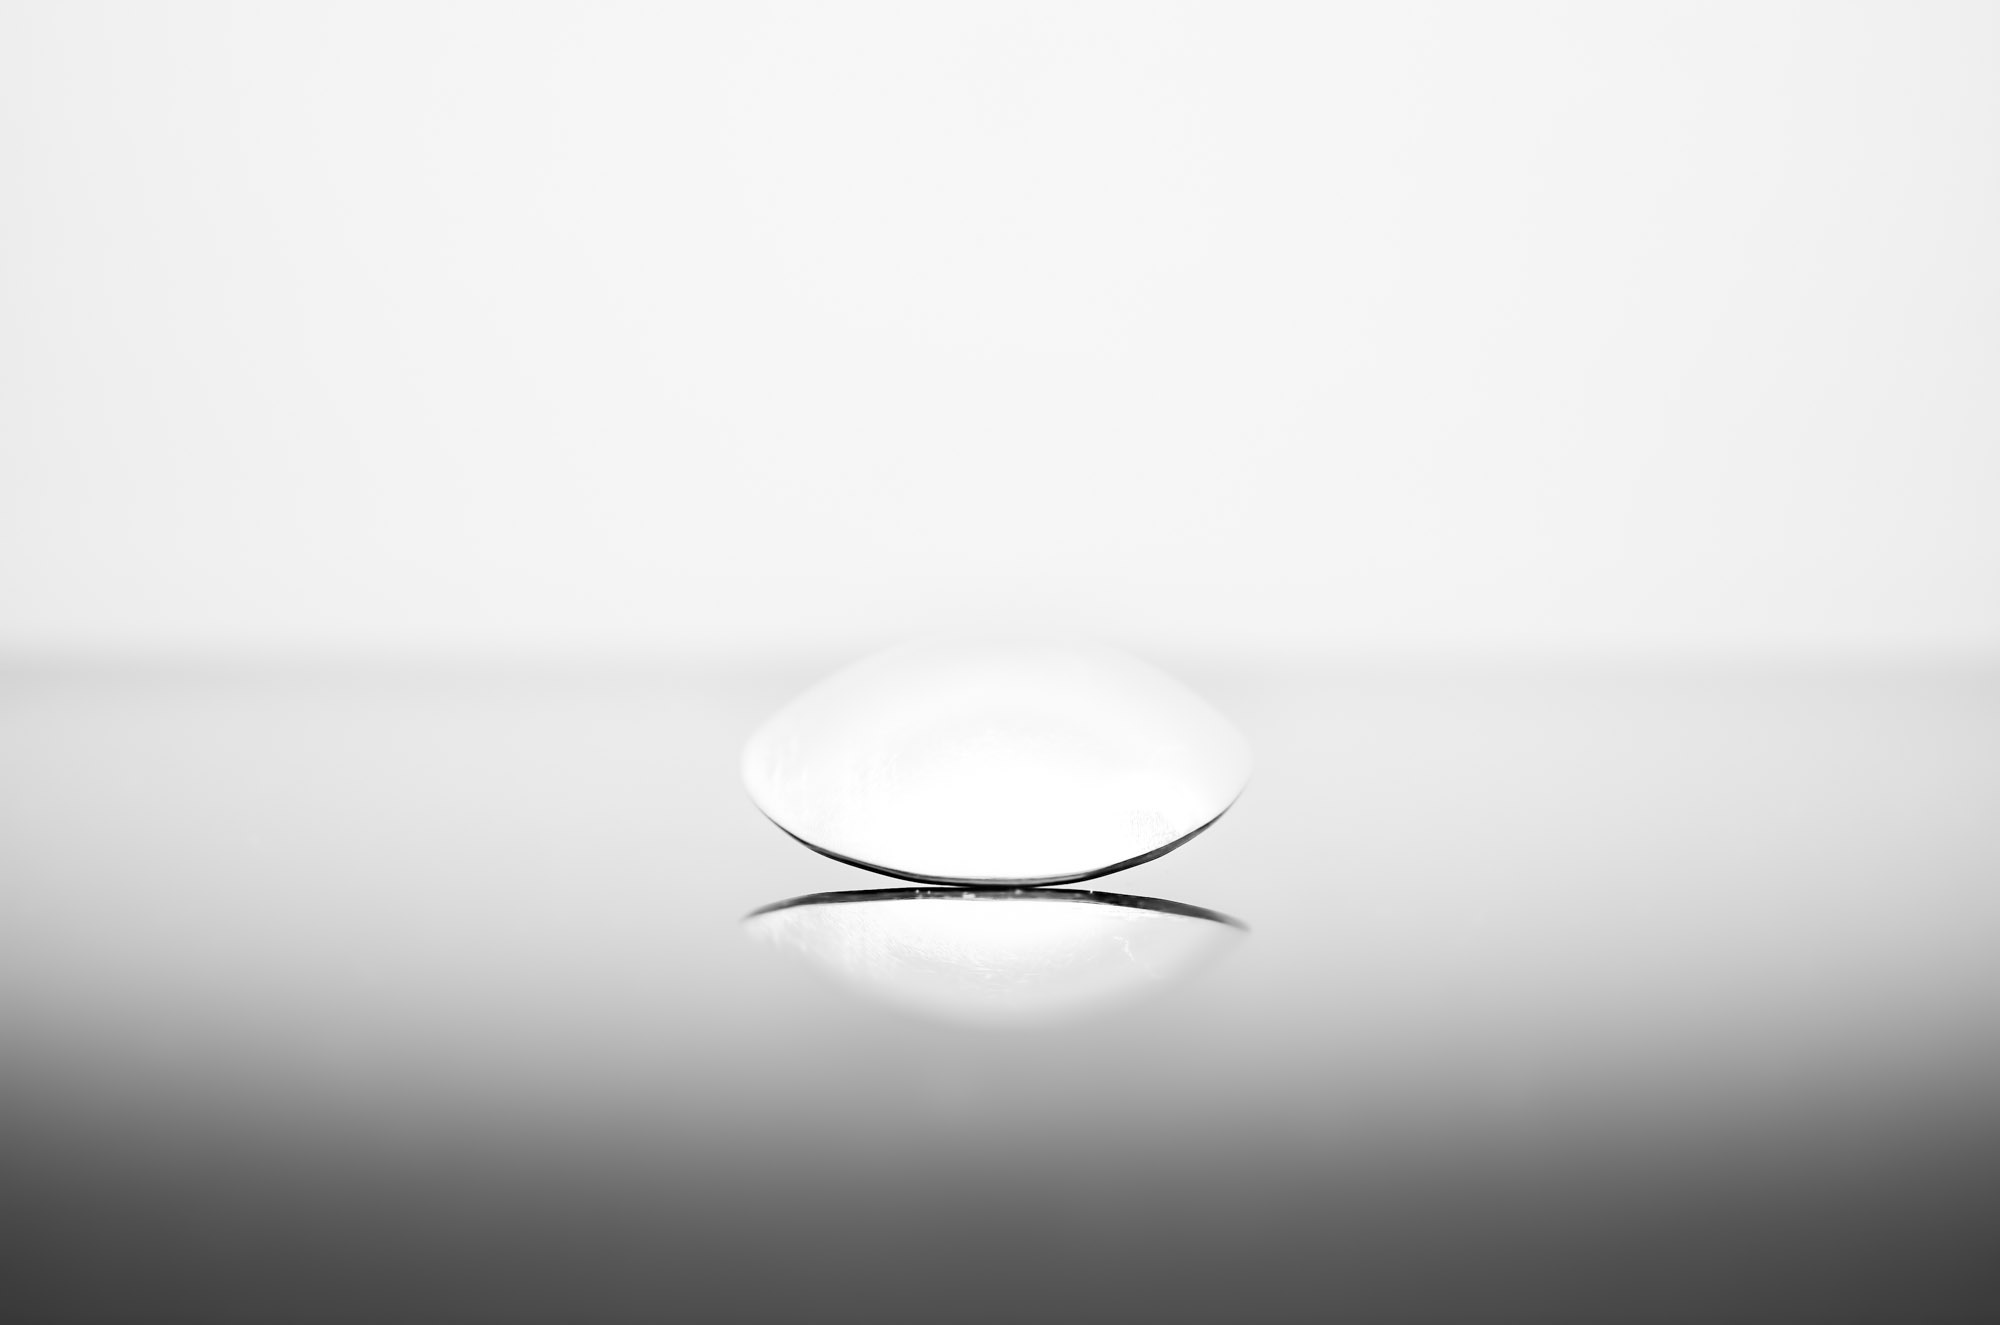 Front view of a dining spoon on black glass